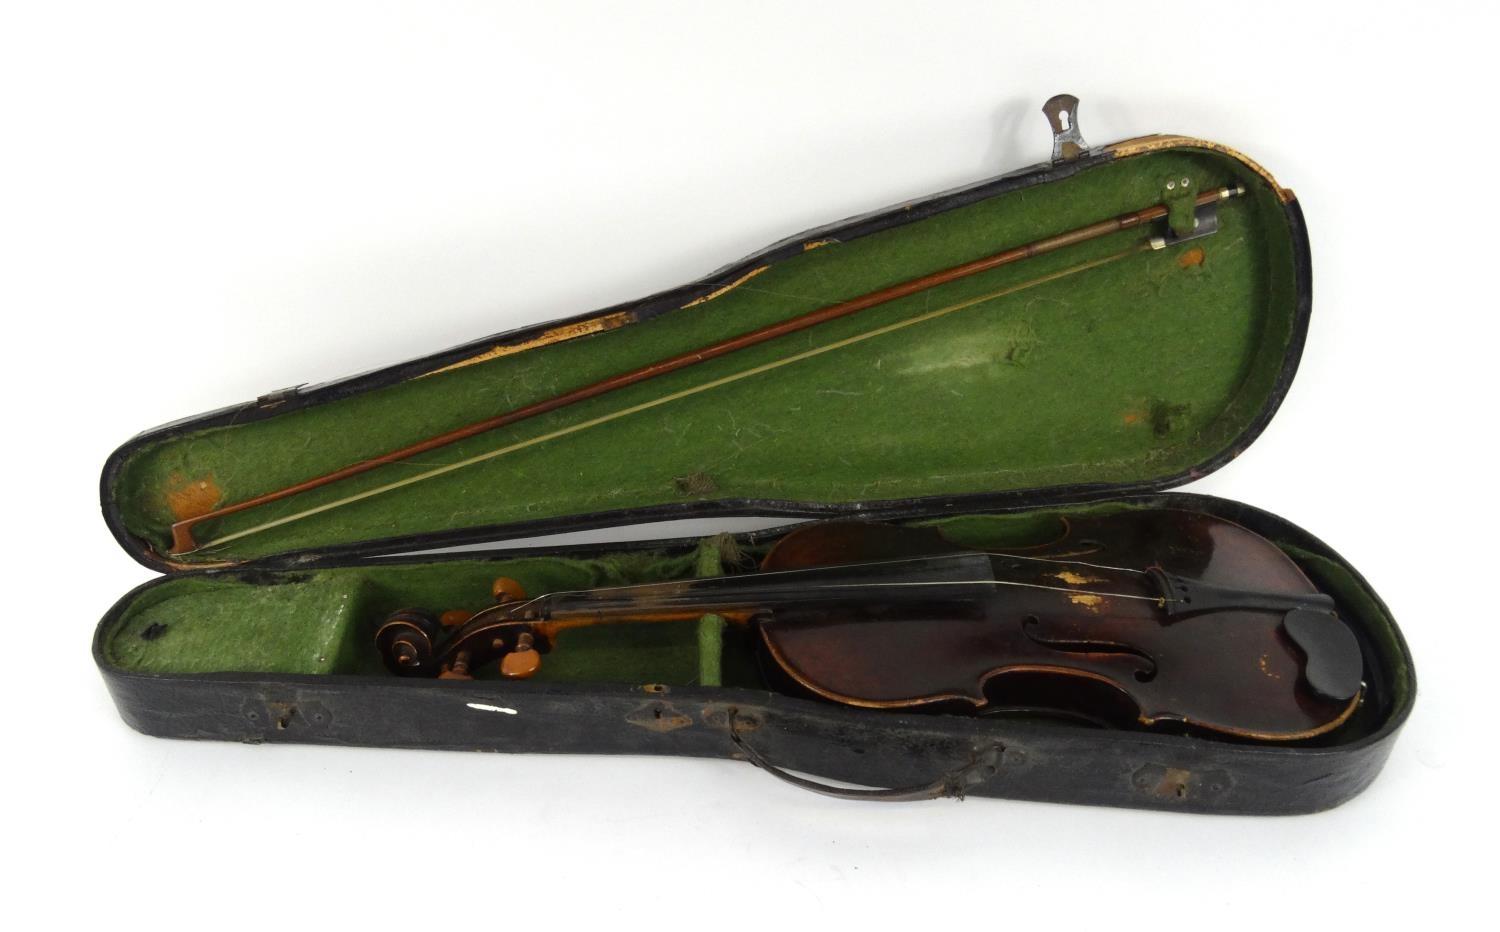 Old wooden violin and a bow with mother of pearl frog, the violin 59cm long - Image 20 of 20